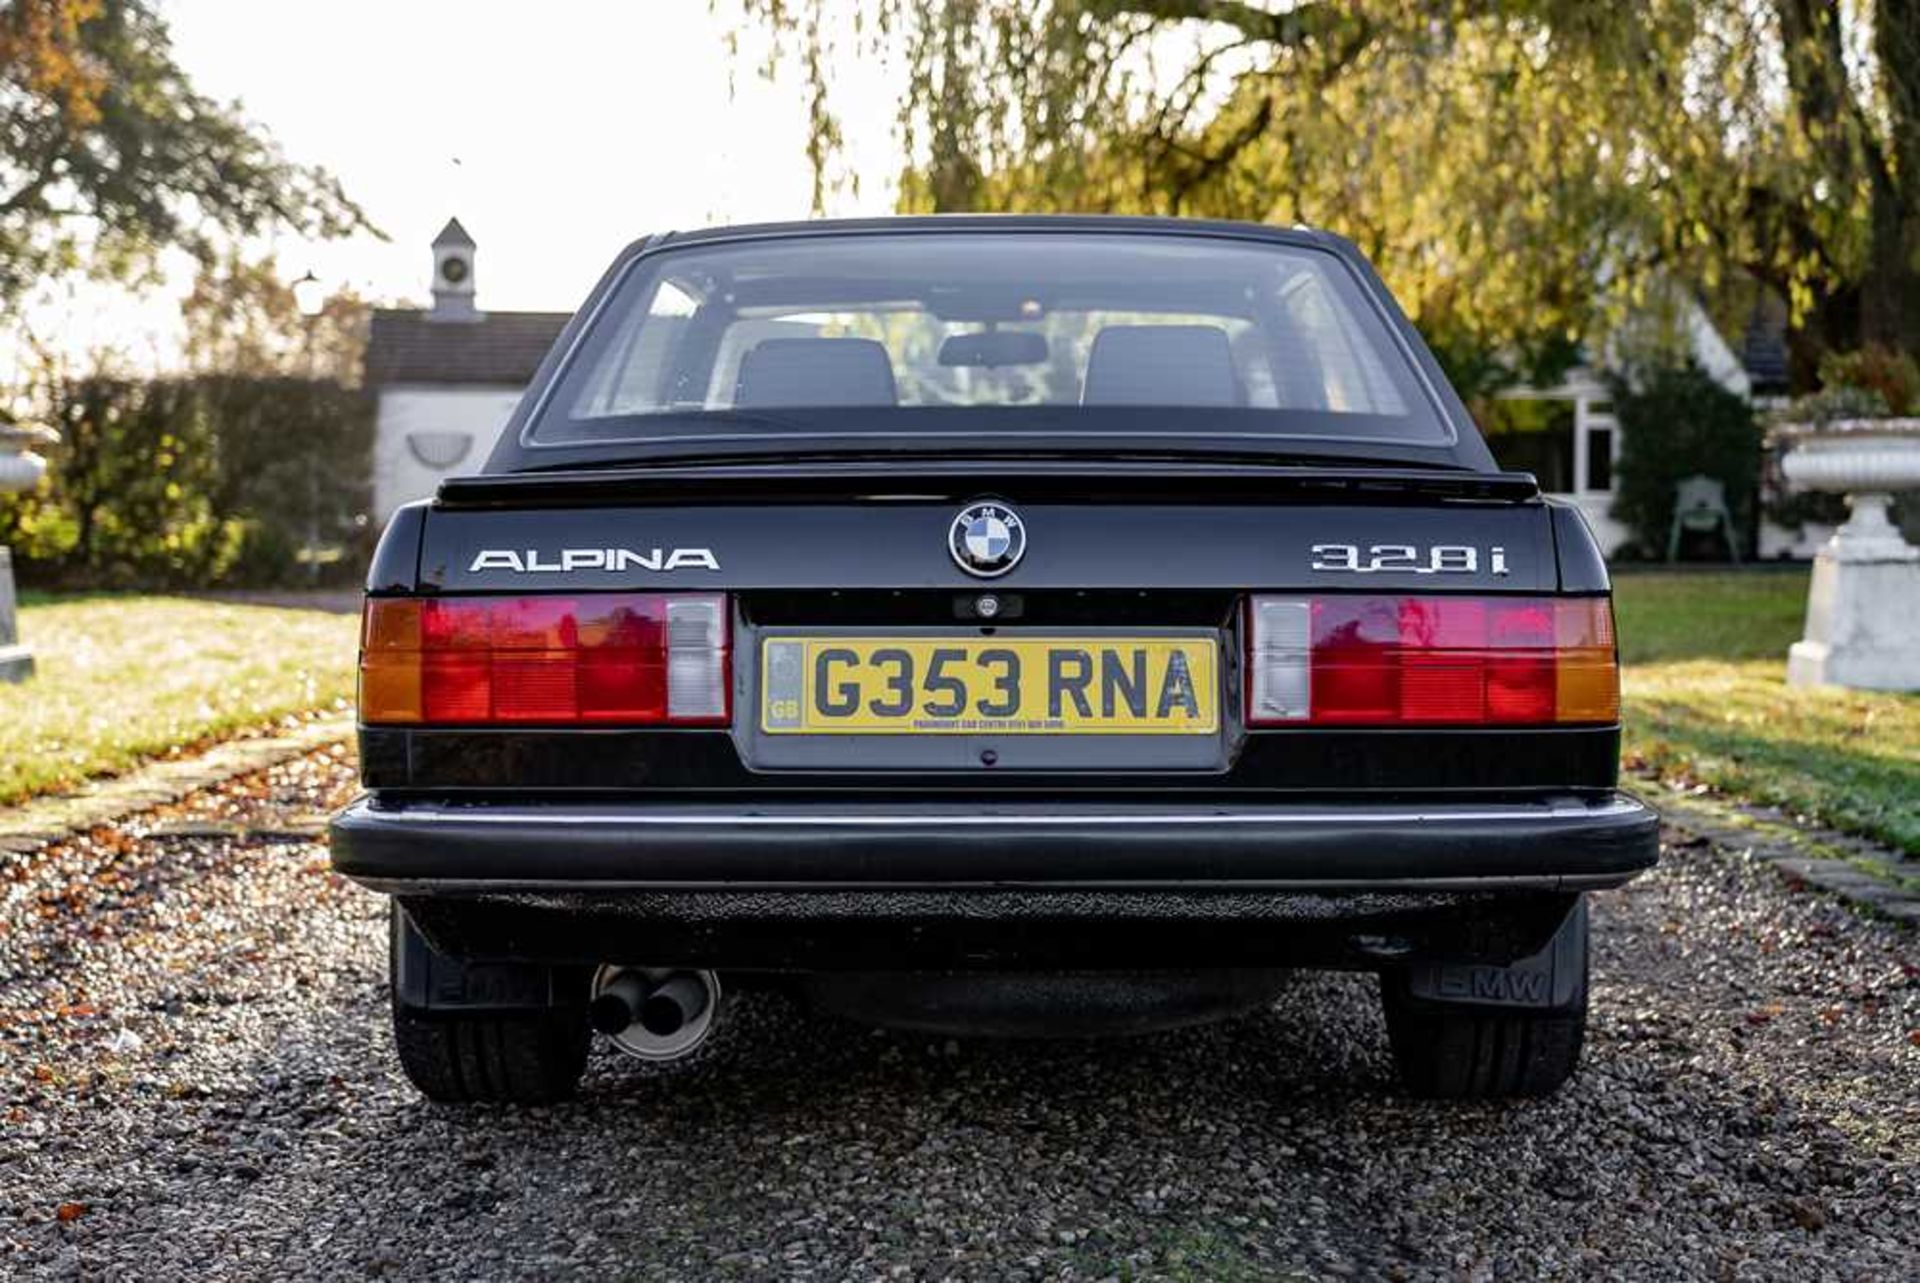 1989 BMW 320i Convertible Converted to Alpina 328i Specification - Image 12 of 51